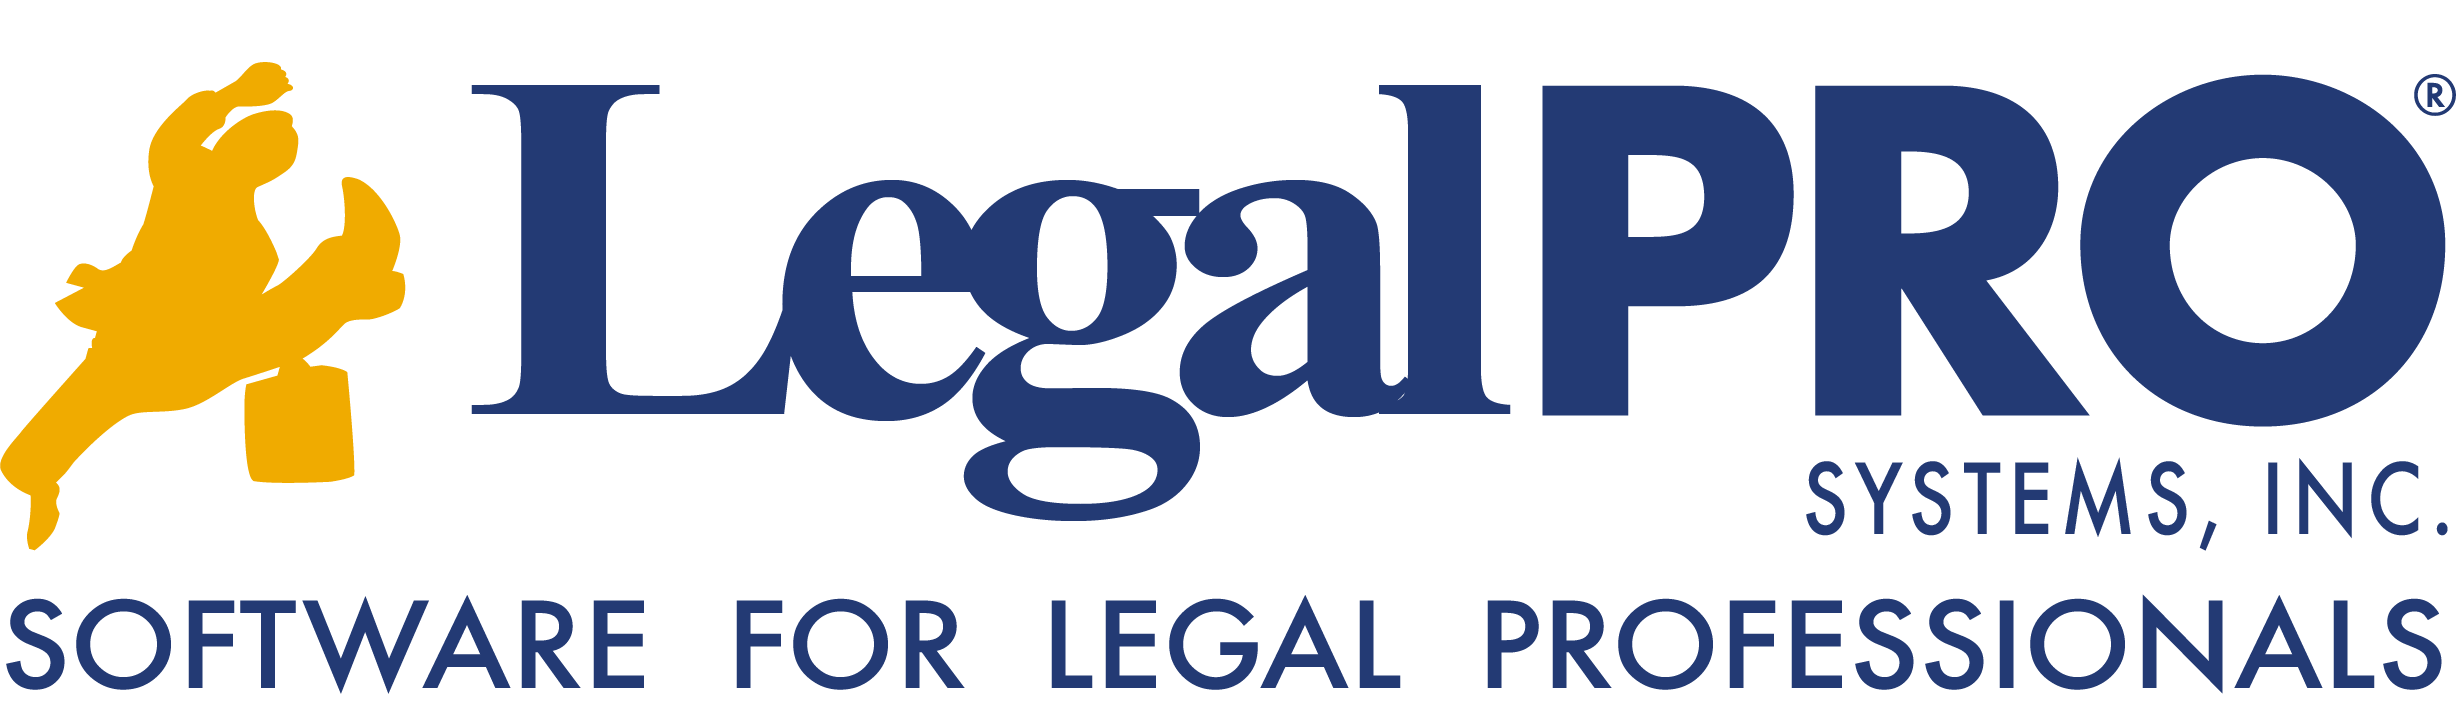 LegalPRO Systems, Inc.